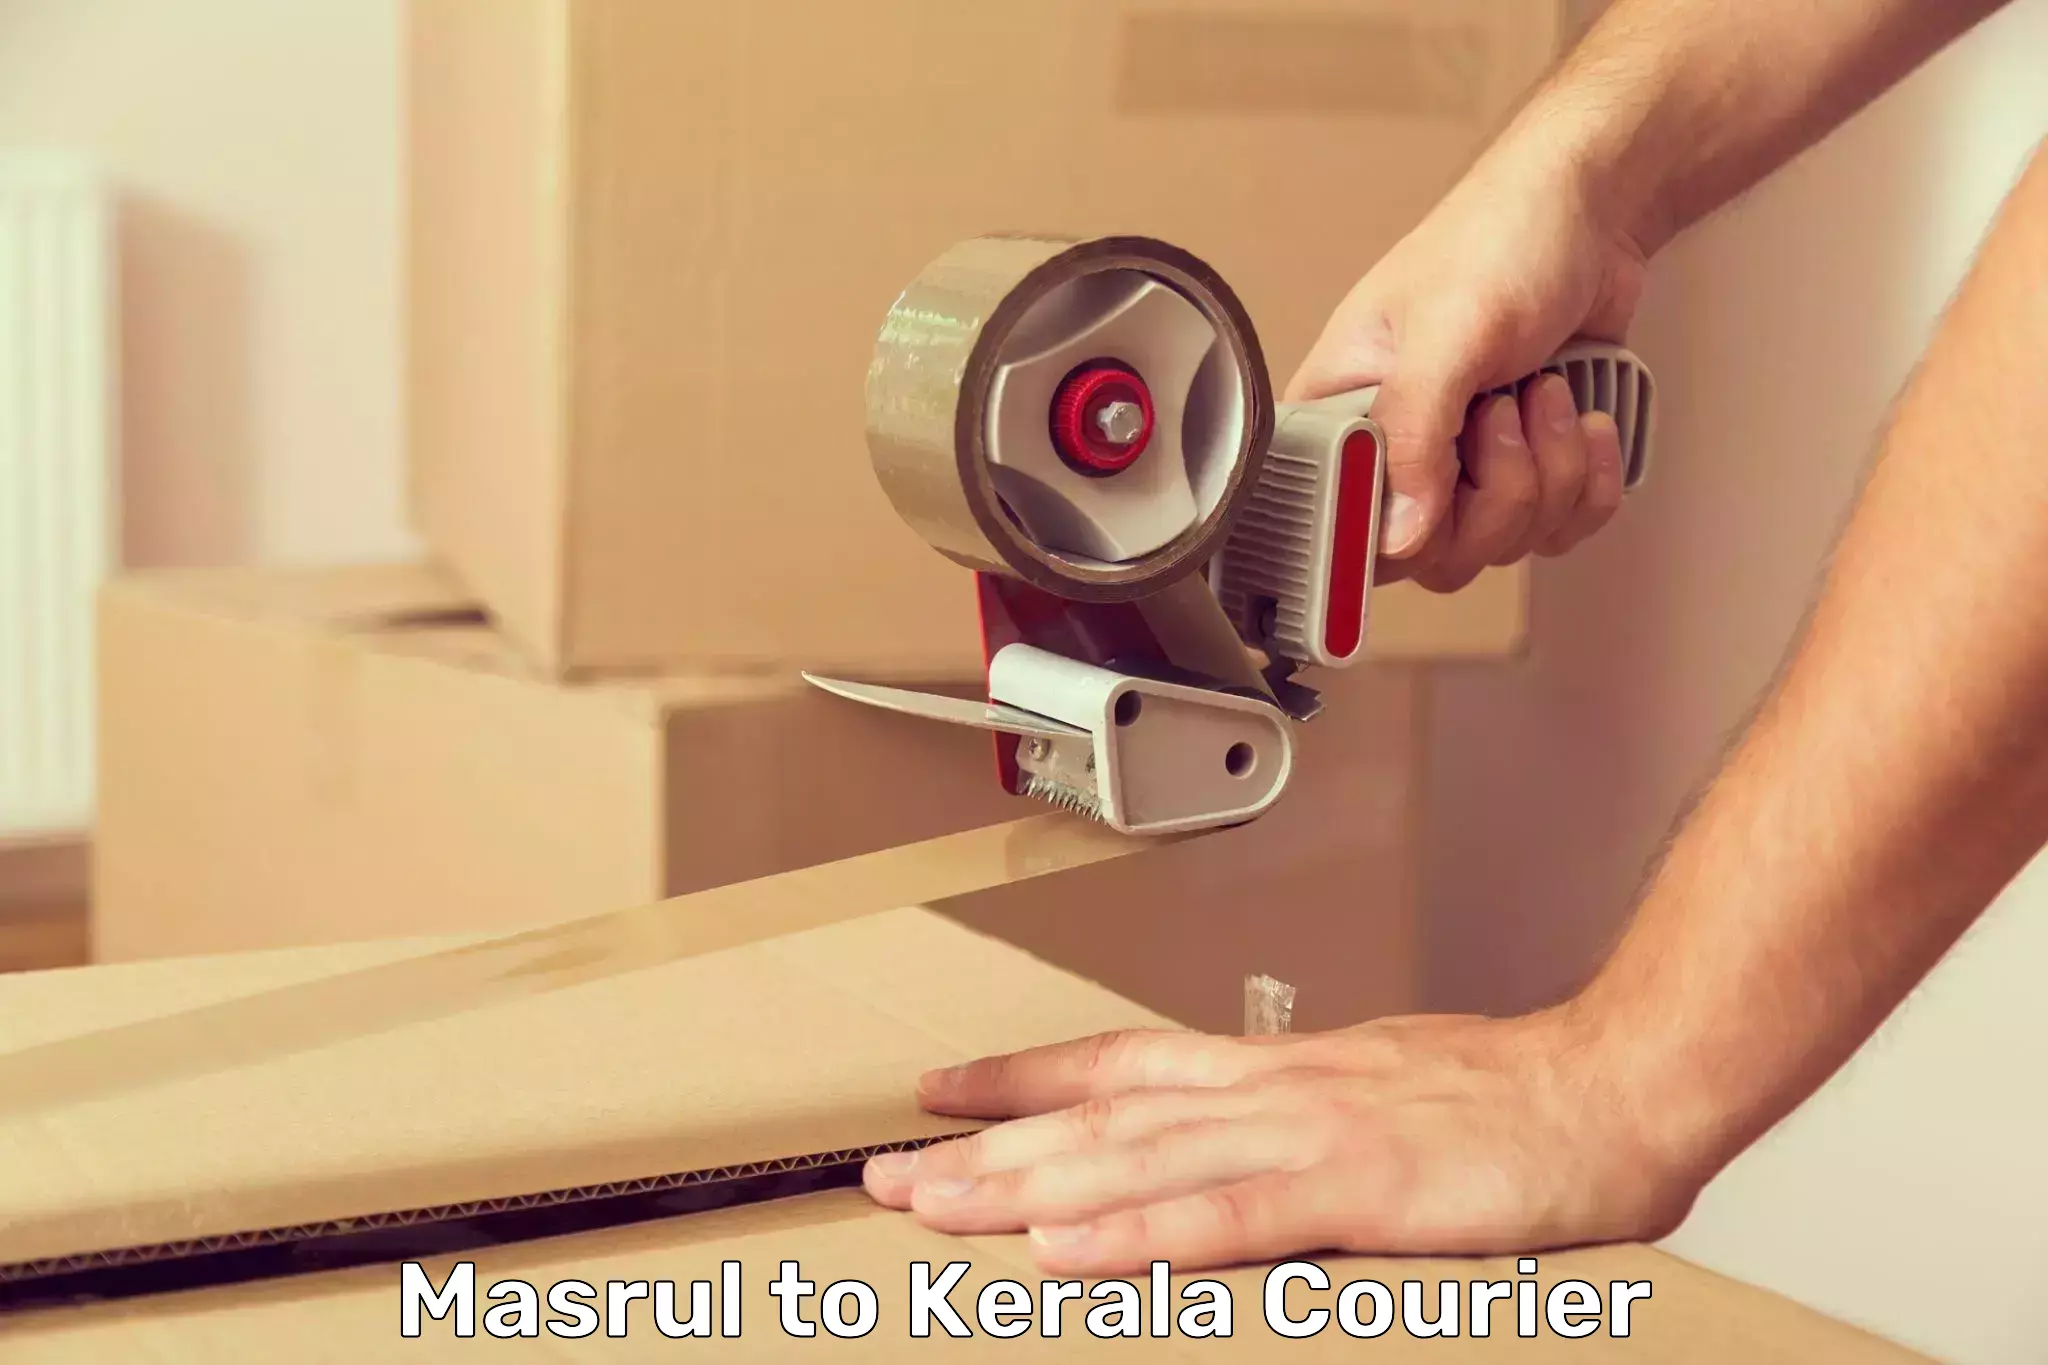 Supply chain delivery Masrul to Kerala